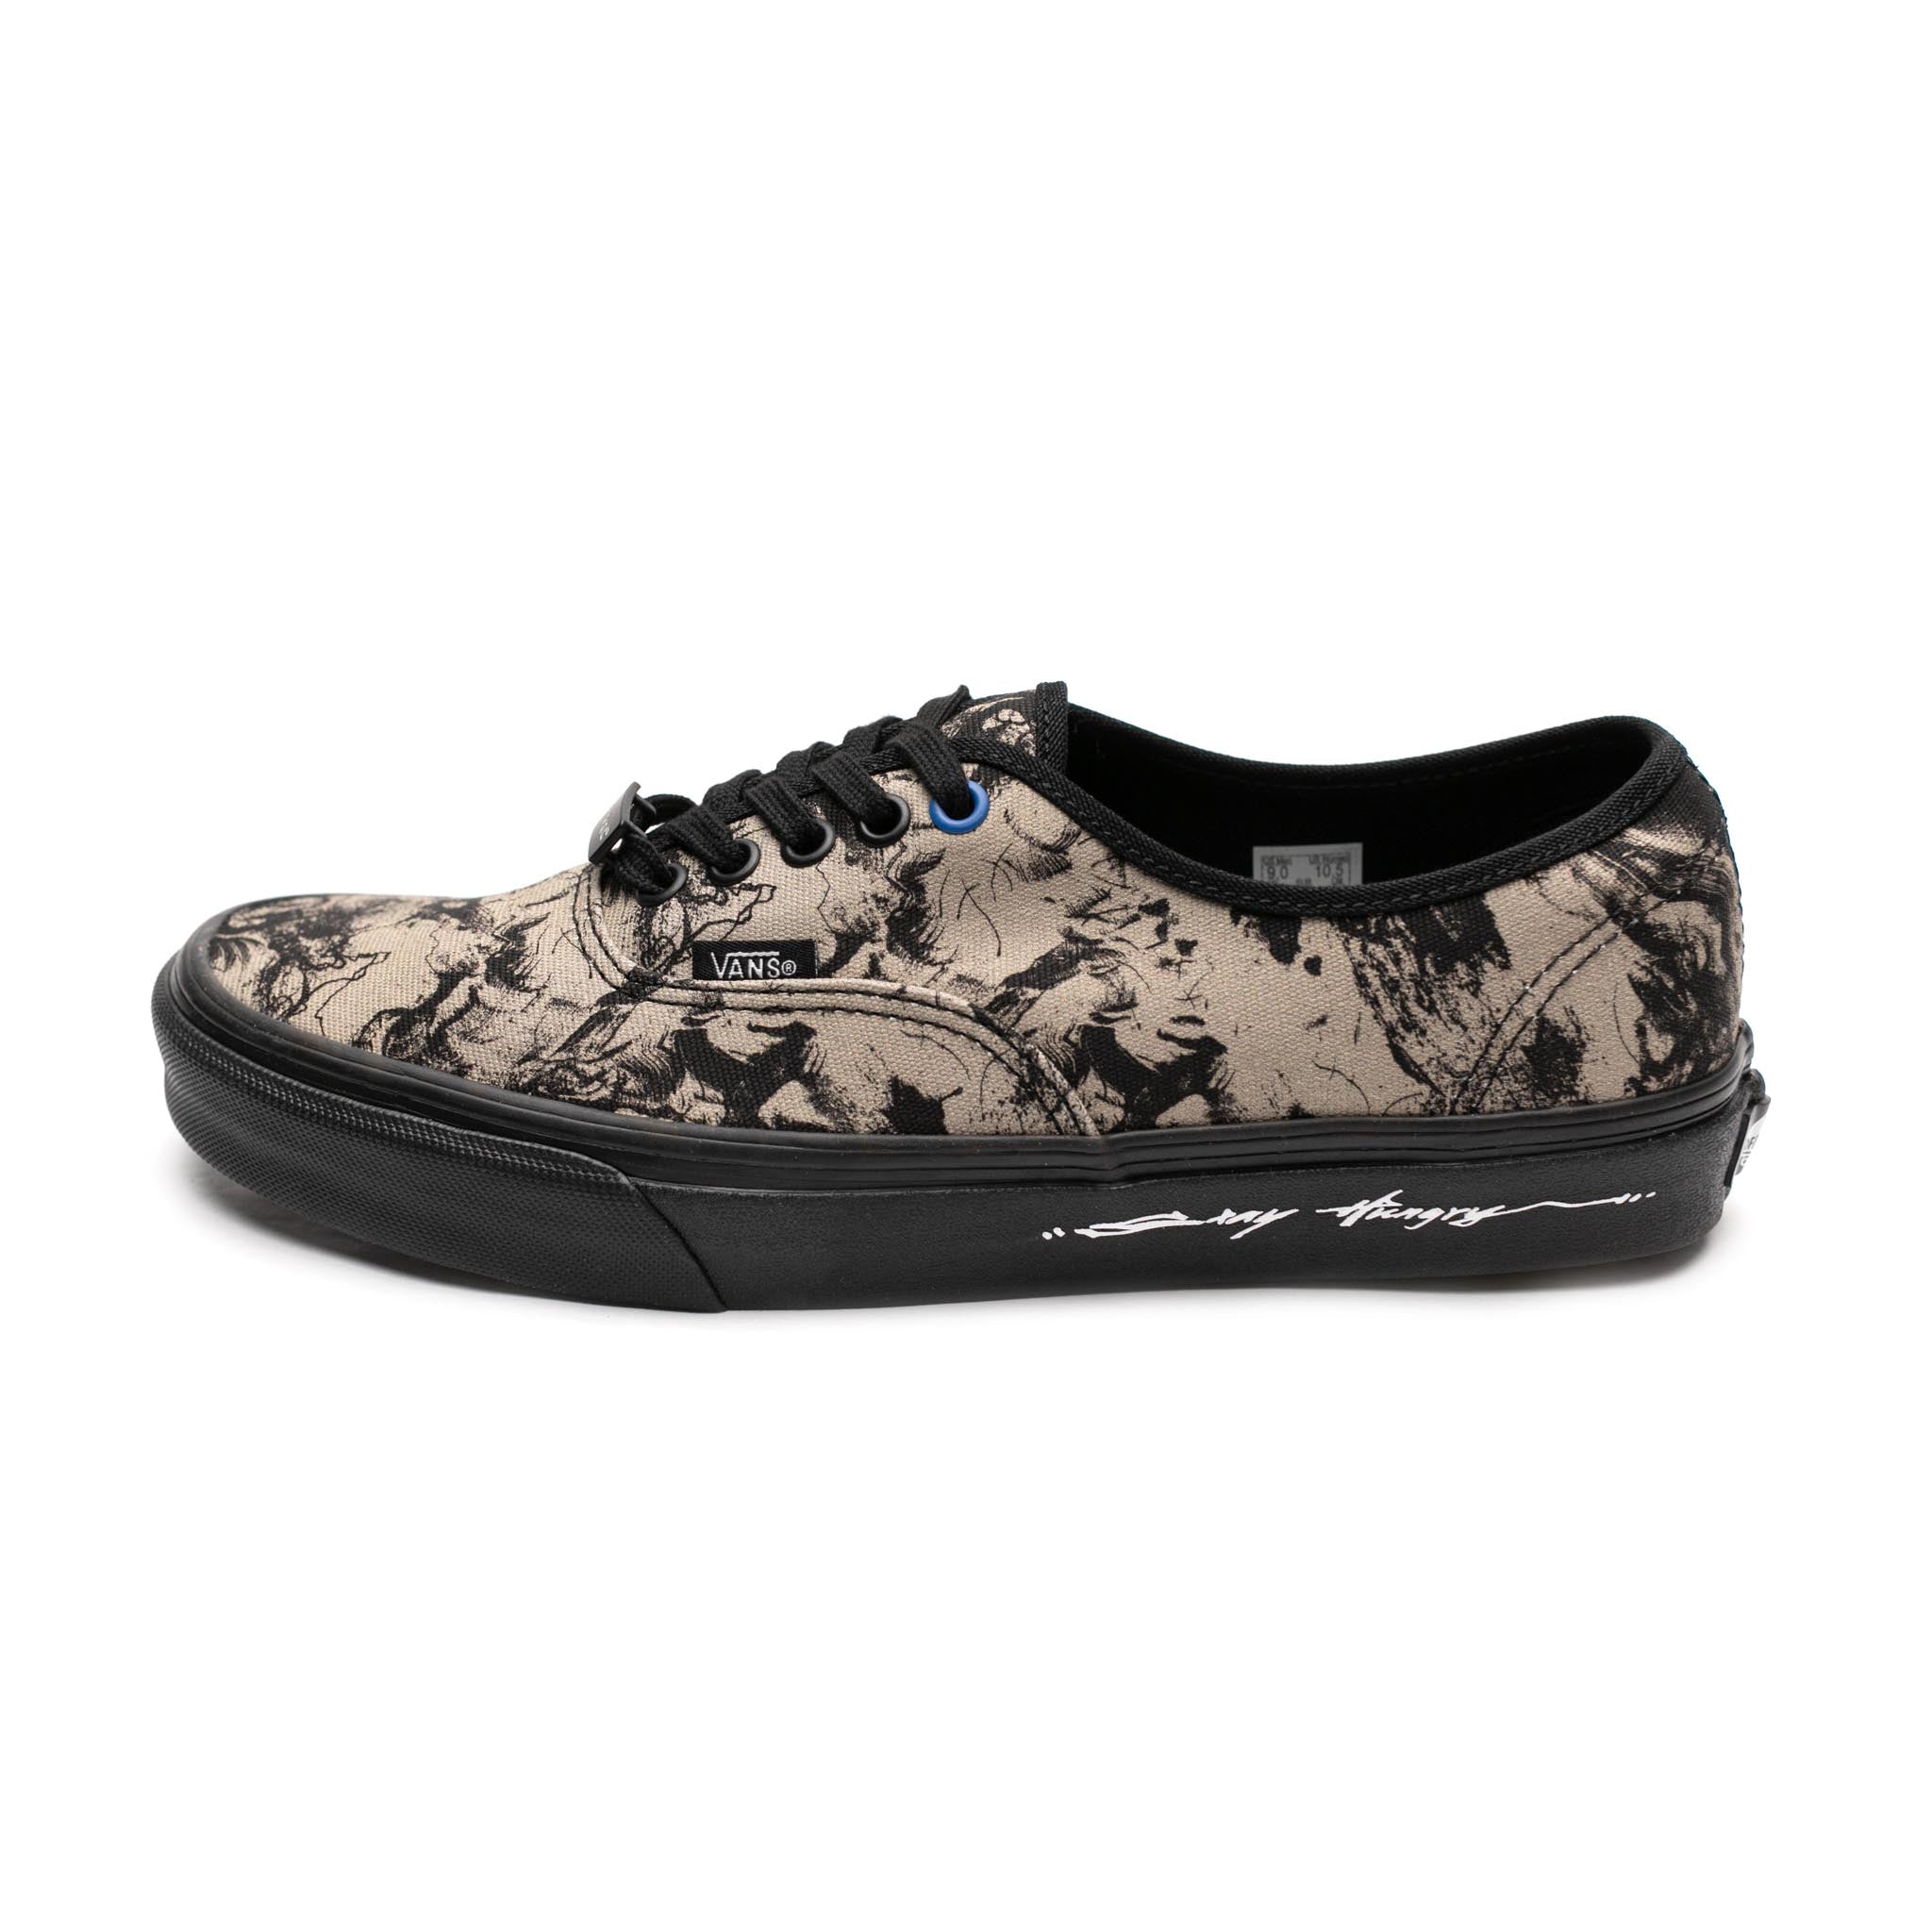 Vans 'Year of the Tiger' Authentic Black